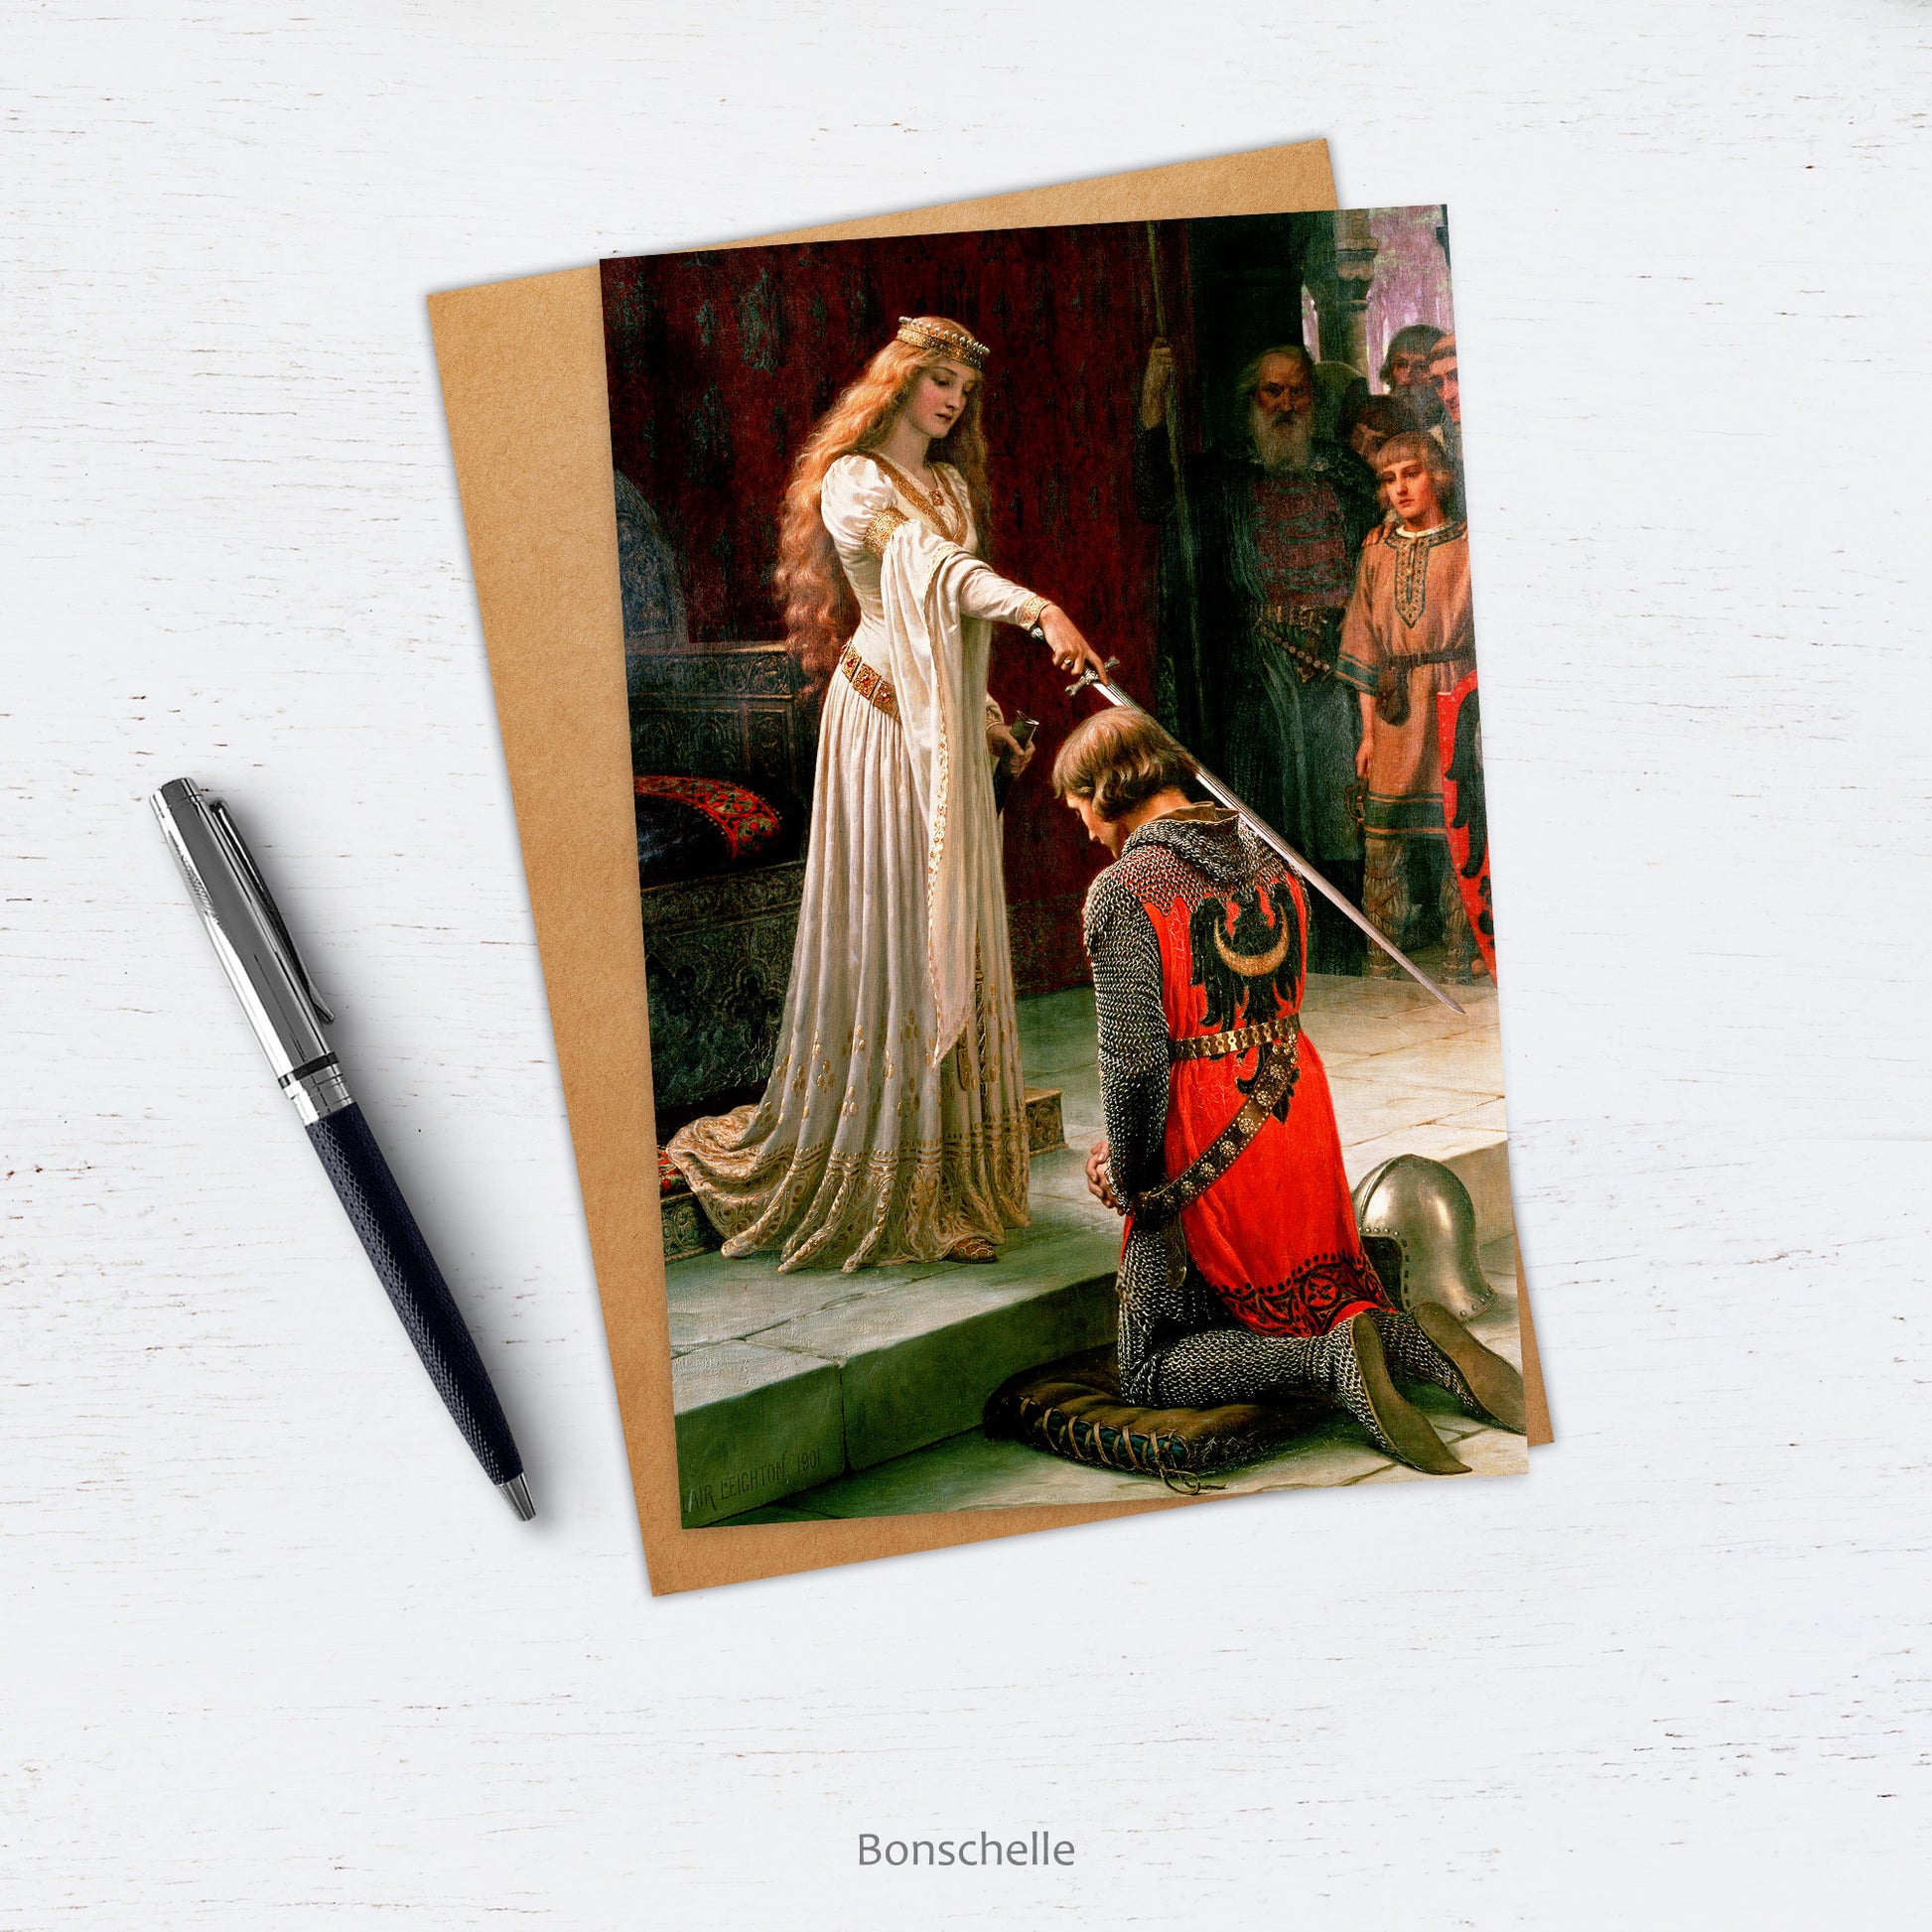 Card and envelope with Pre-Raphaelite image of 'The Accolade' by Edmund Leighton  (1852–1922) on counter top with pen